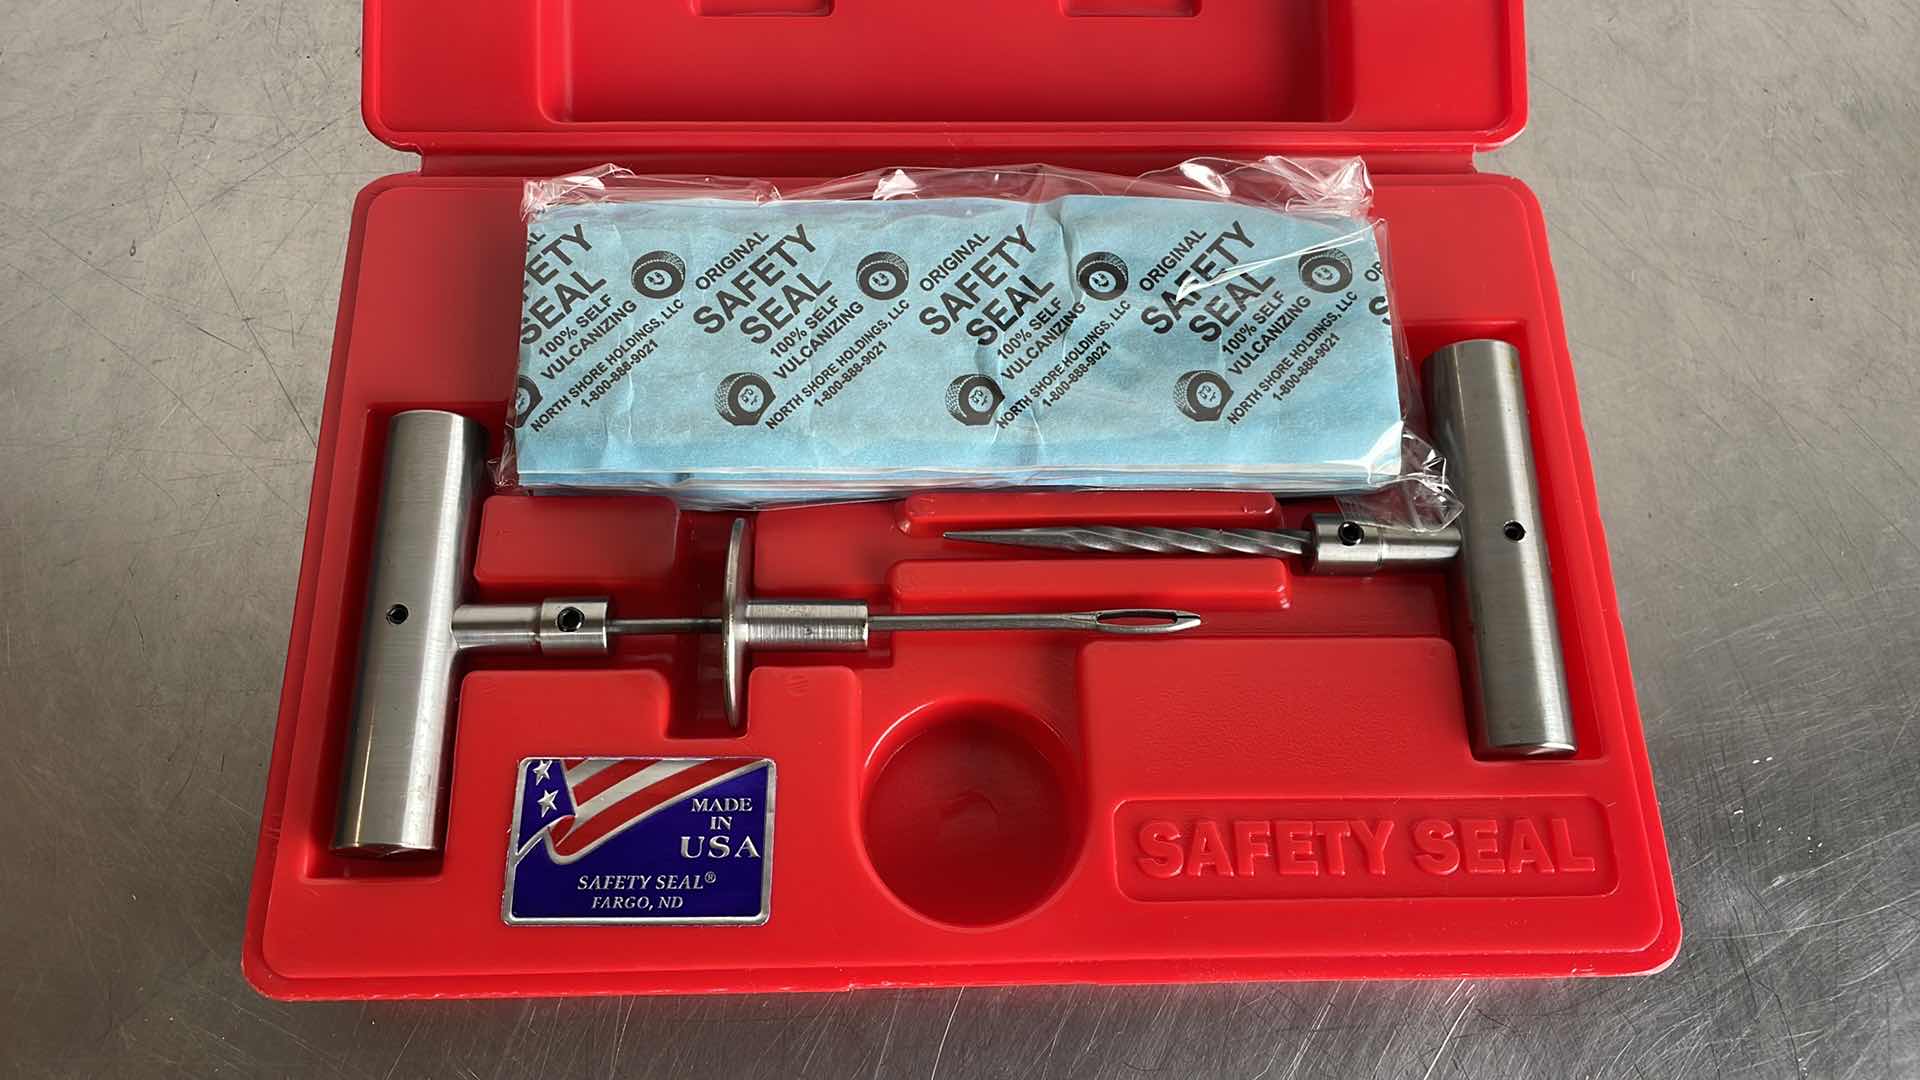 Photo 3 of SAFETY SEAL TRUCK TIRE REPAIR KIT